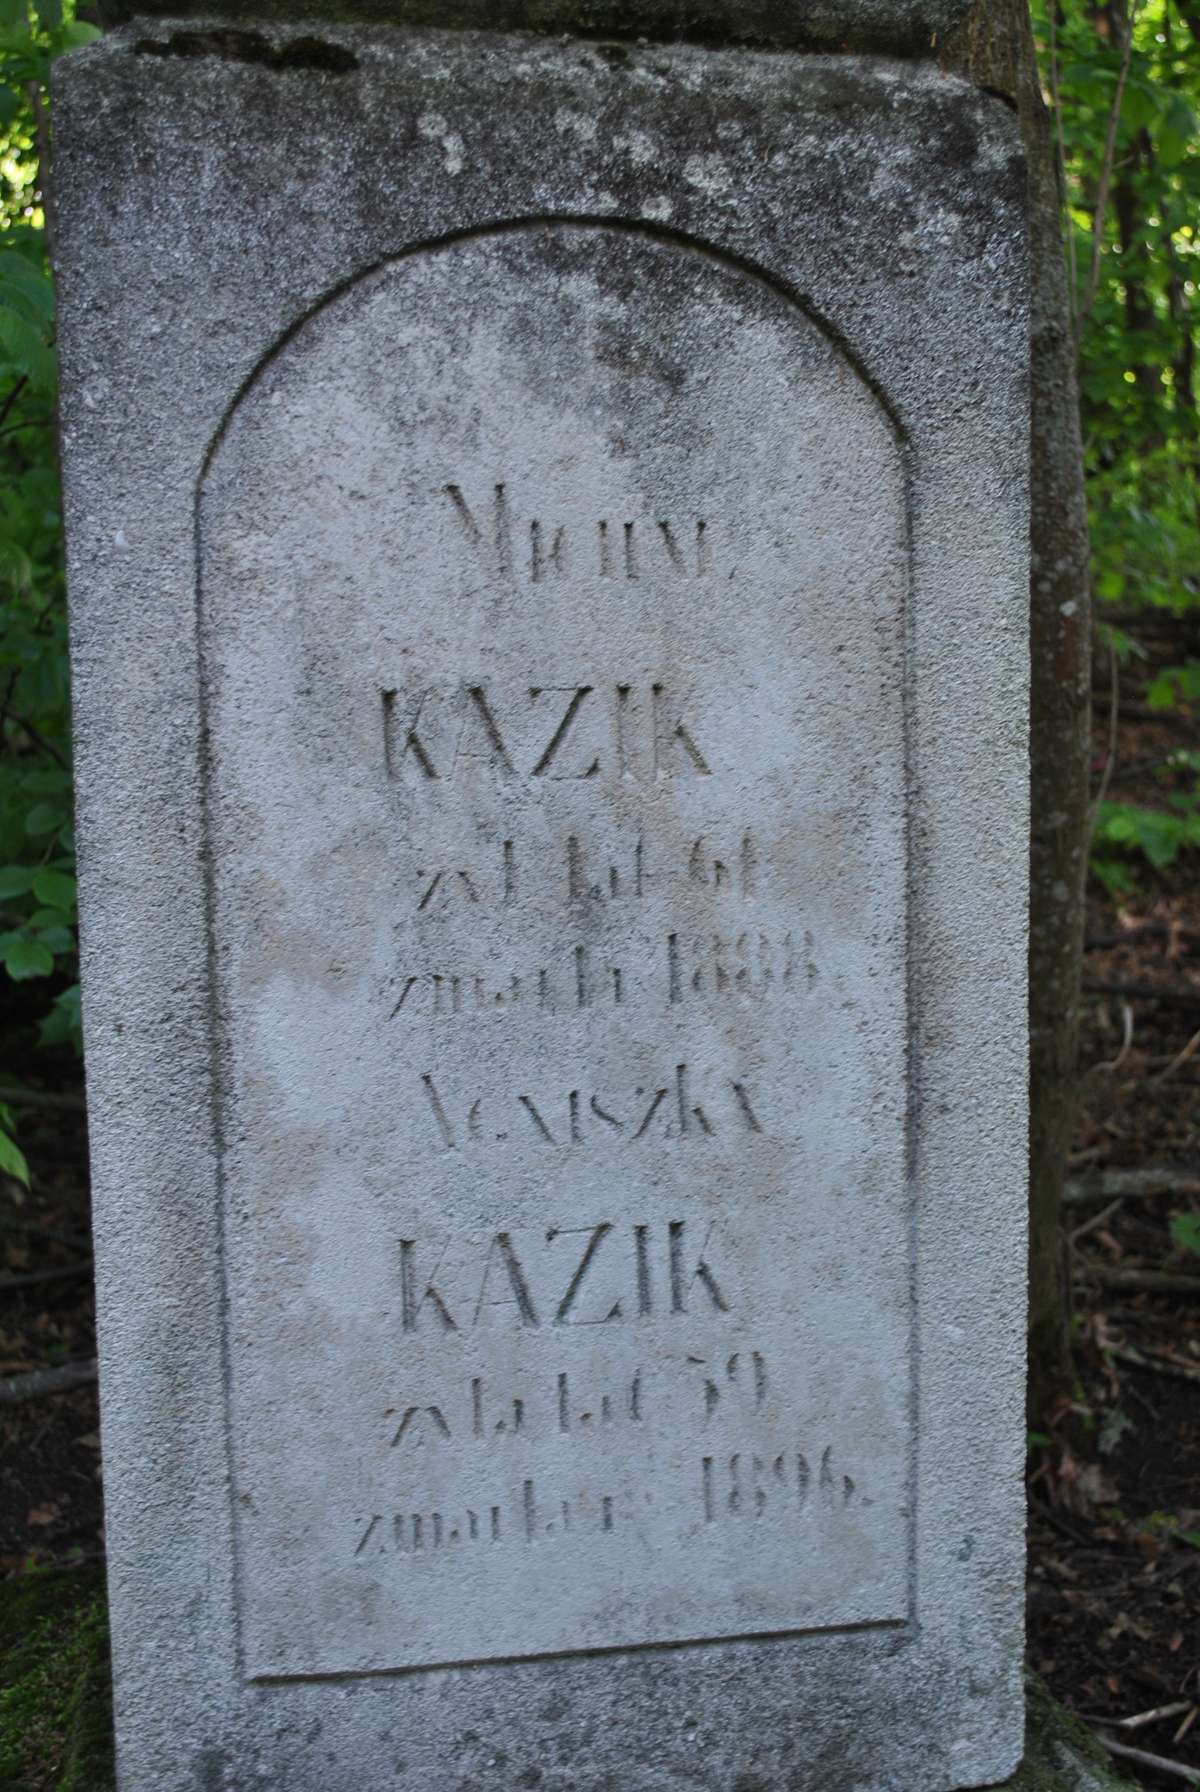 Inscription from the gravestone of Agnieszka and Michal Kazik. Cemetery in Kokutkowce